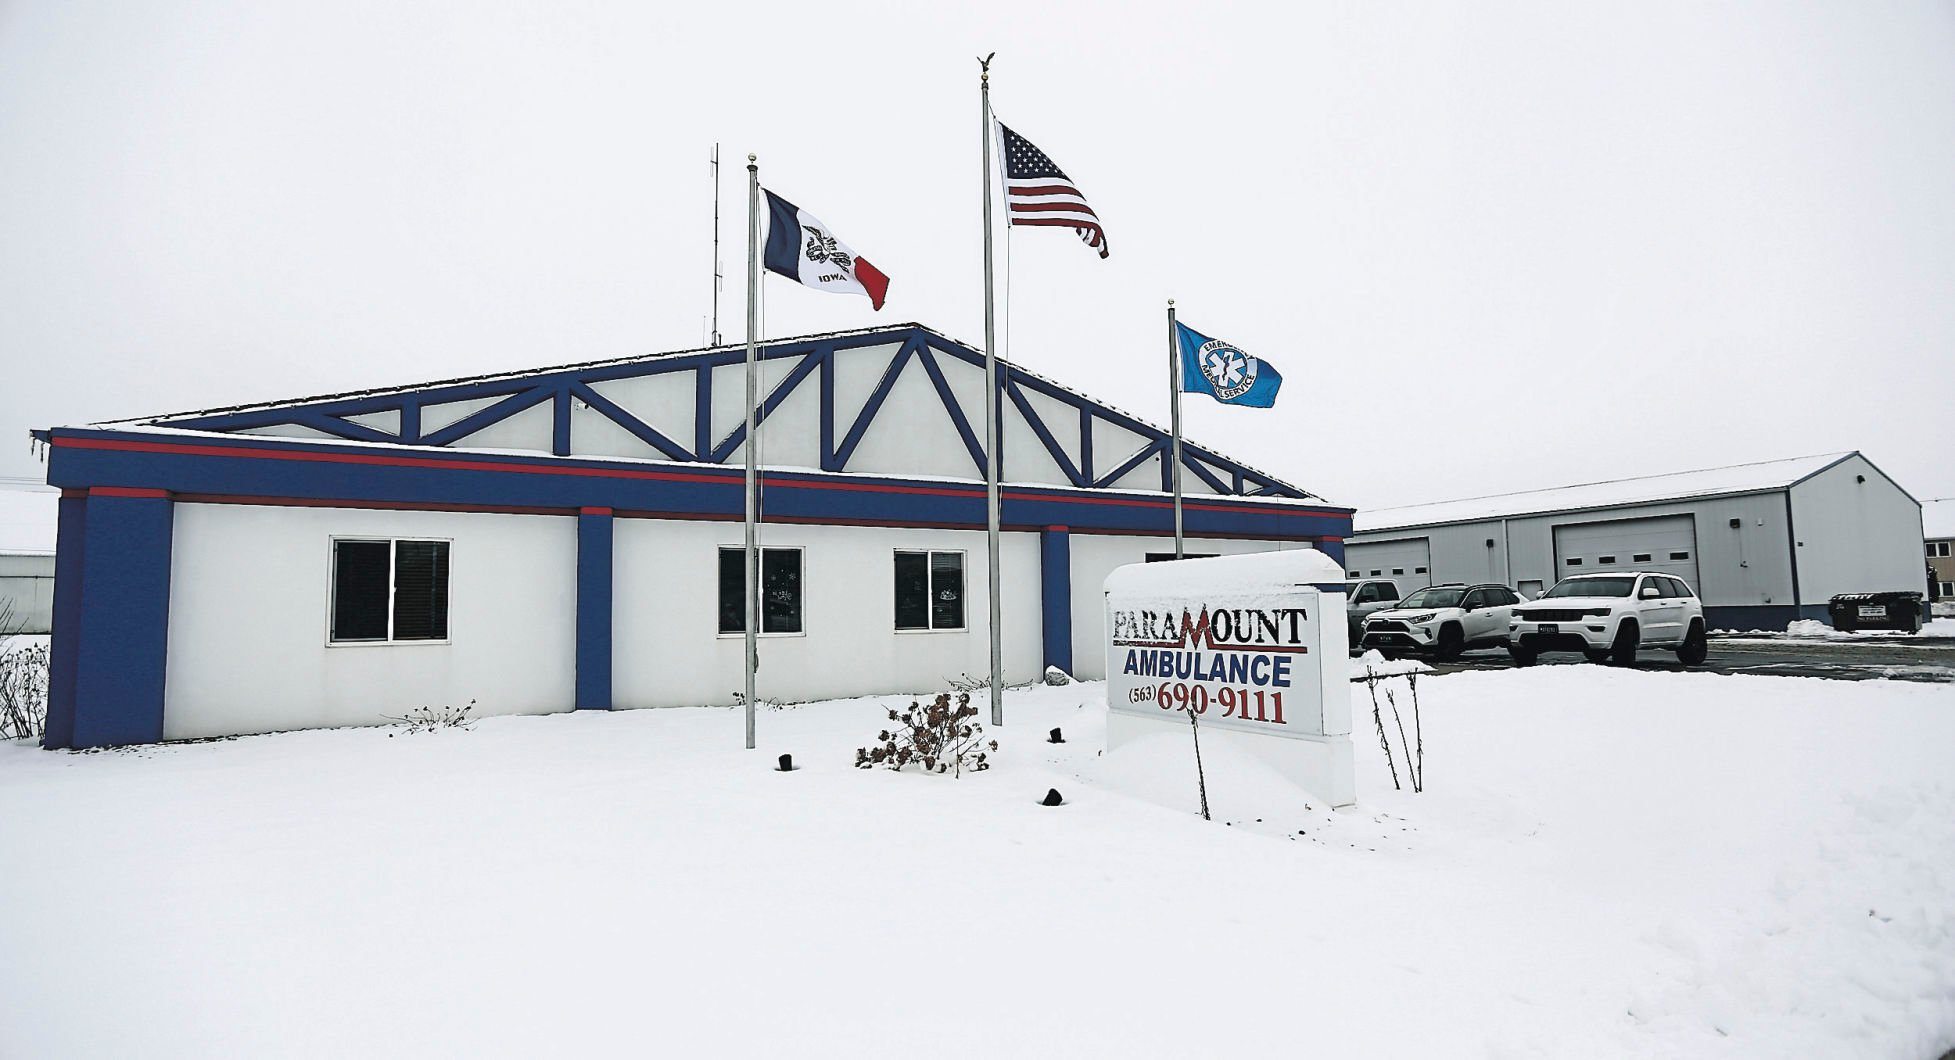 Paramount Ambulance located on Wolff Road in Dubuque.    PHOTO CREDIT: Dave Kettering